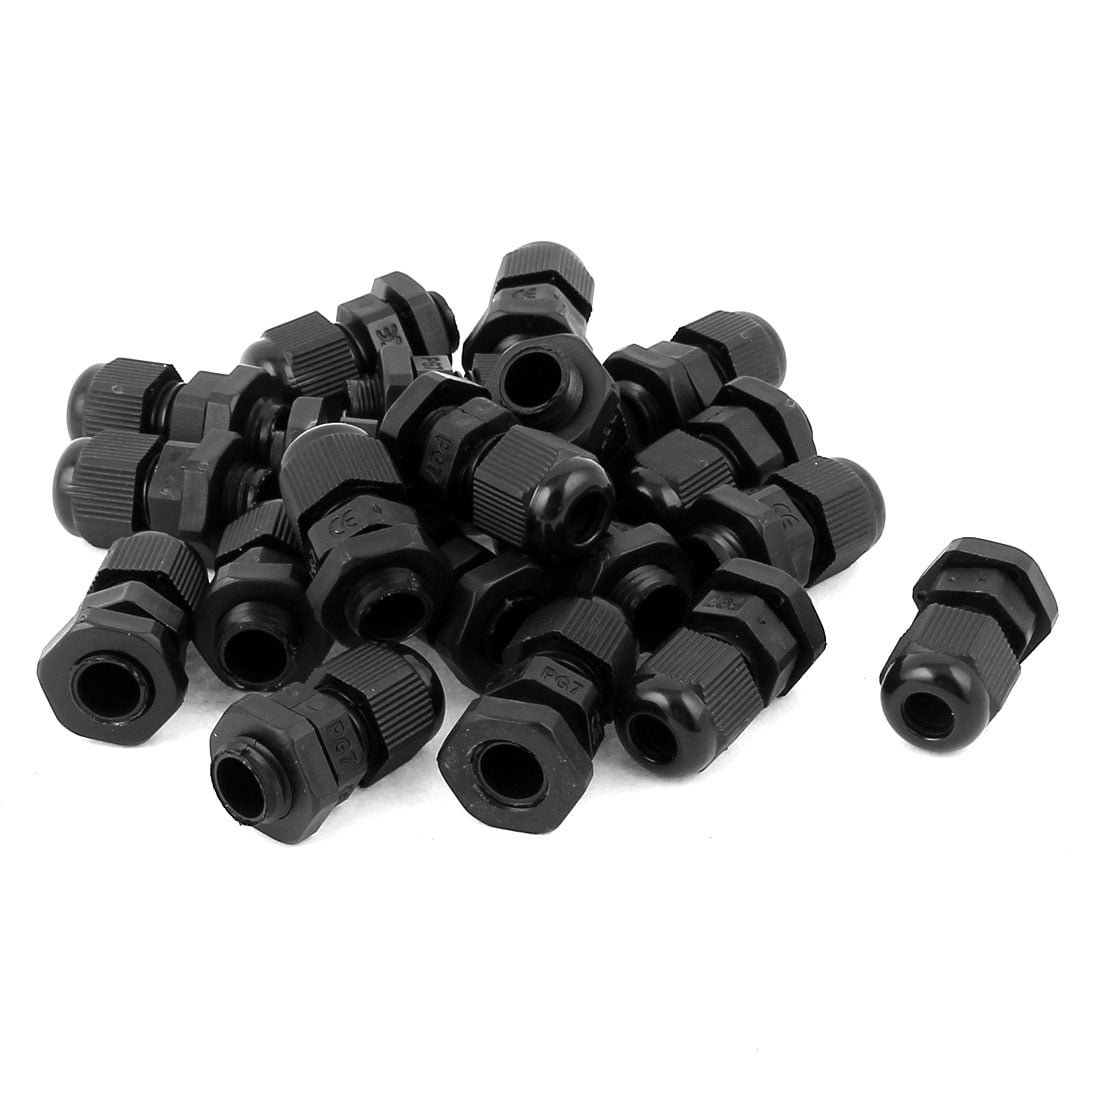 10PCS PG7 Black Plastic Waterproof Connector Gland 3-6.5mm Dia Cable New 